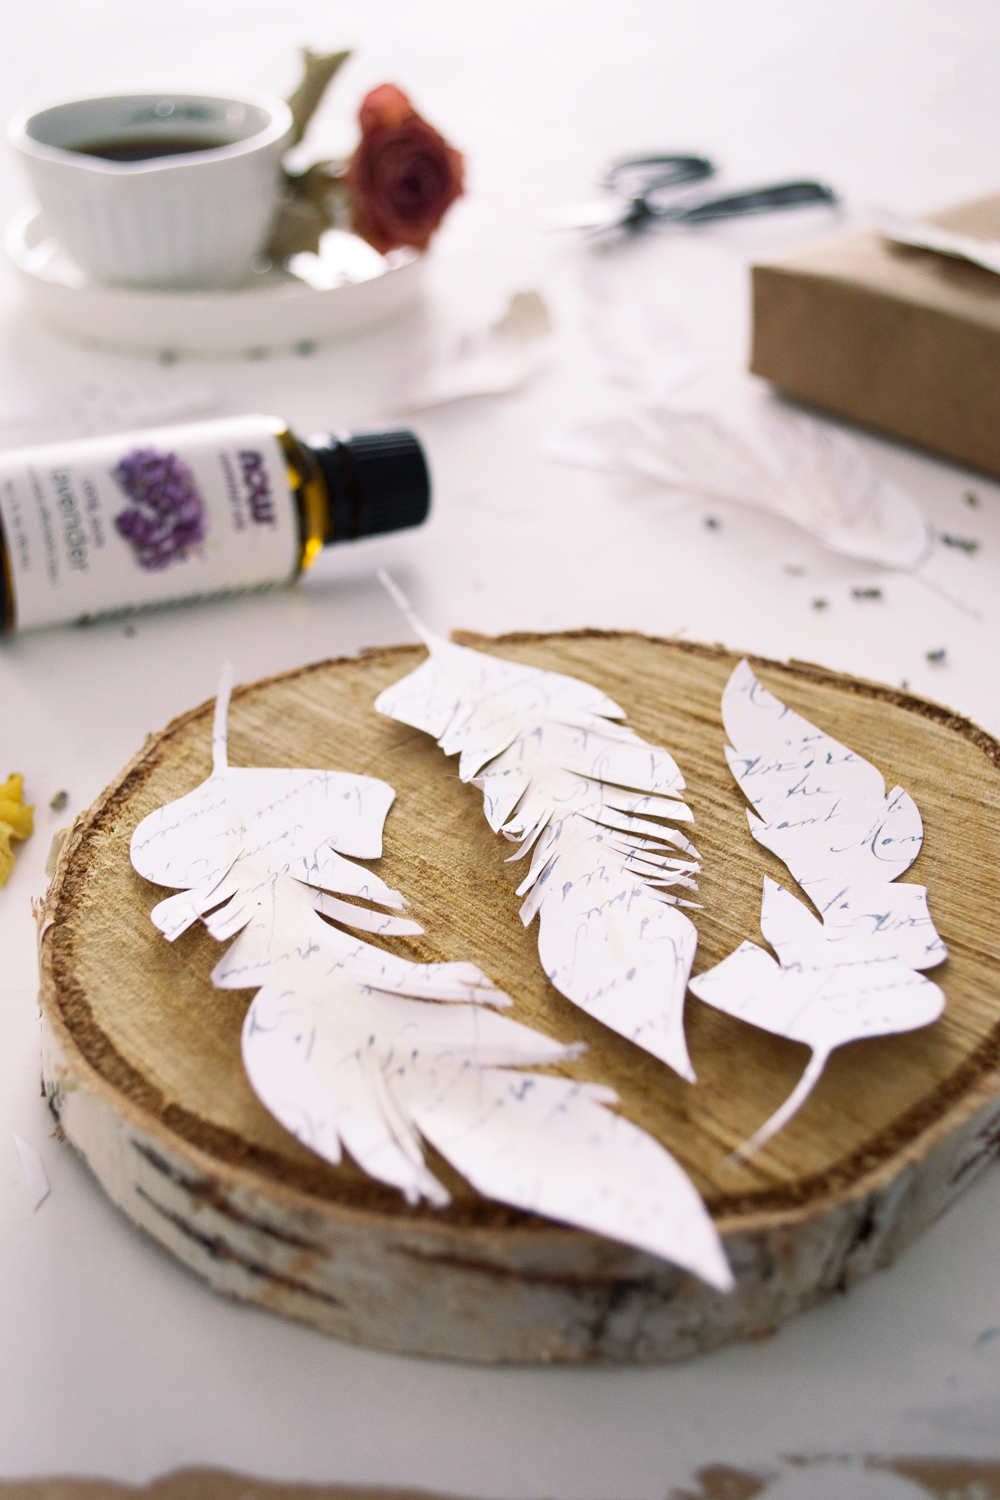 Printable Paper Feathers